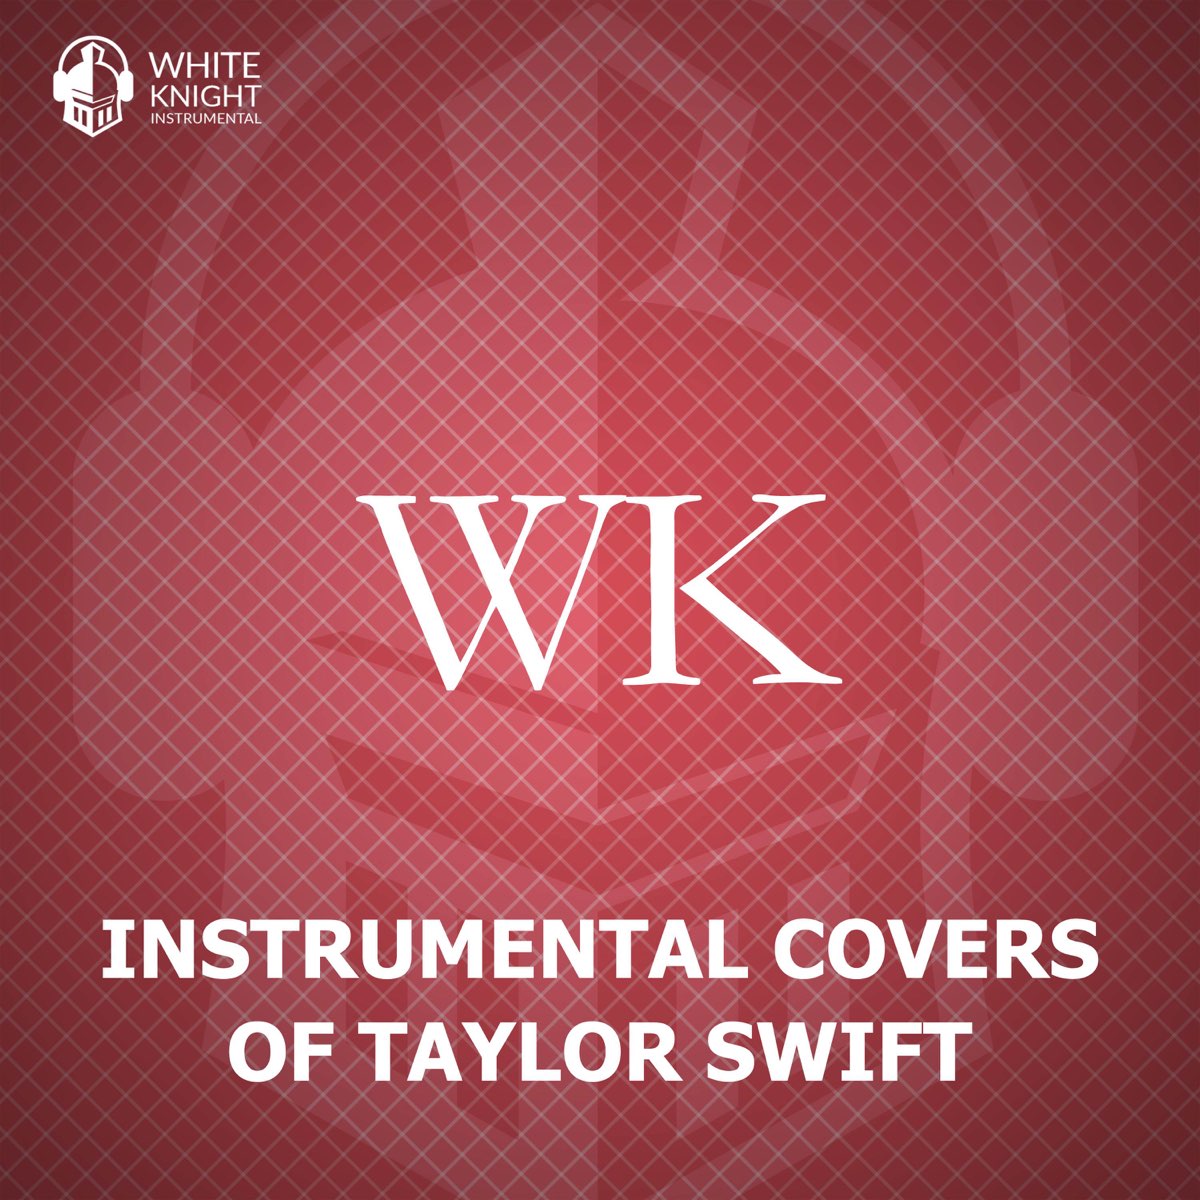 Instrumental Covers of Taylor Swift by White Knight Instrumental on Apple  Music